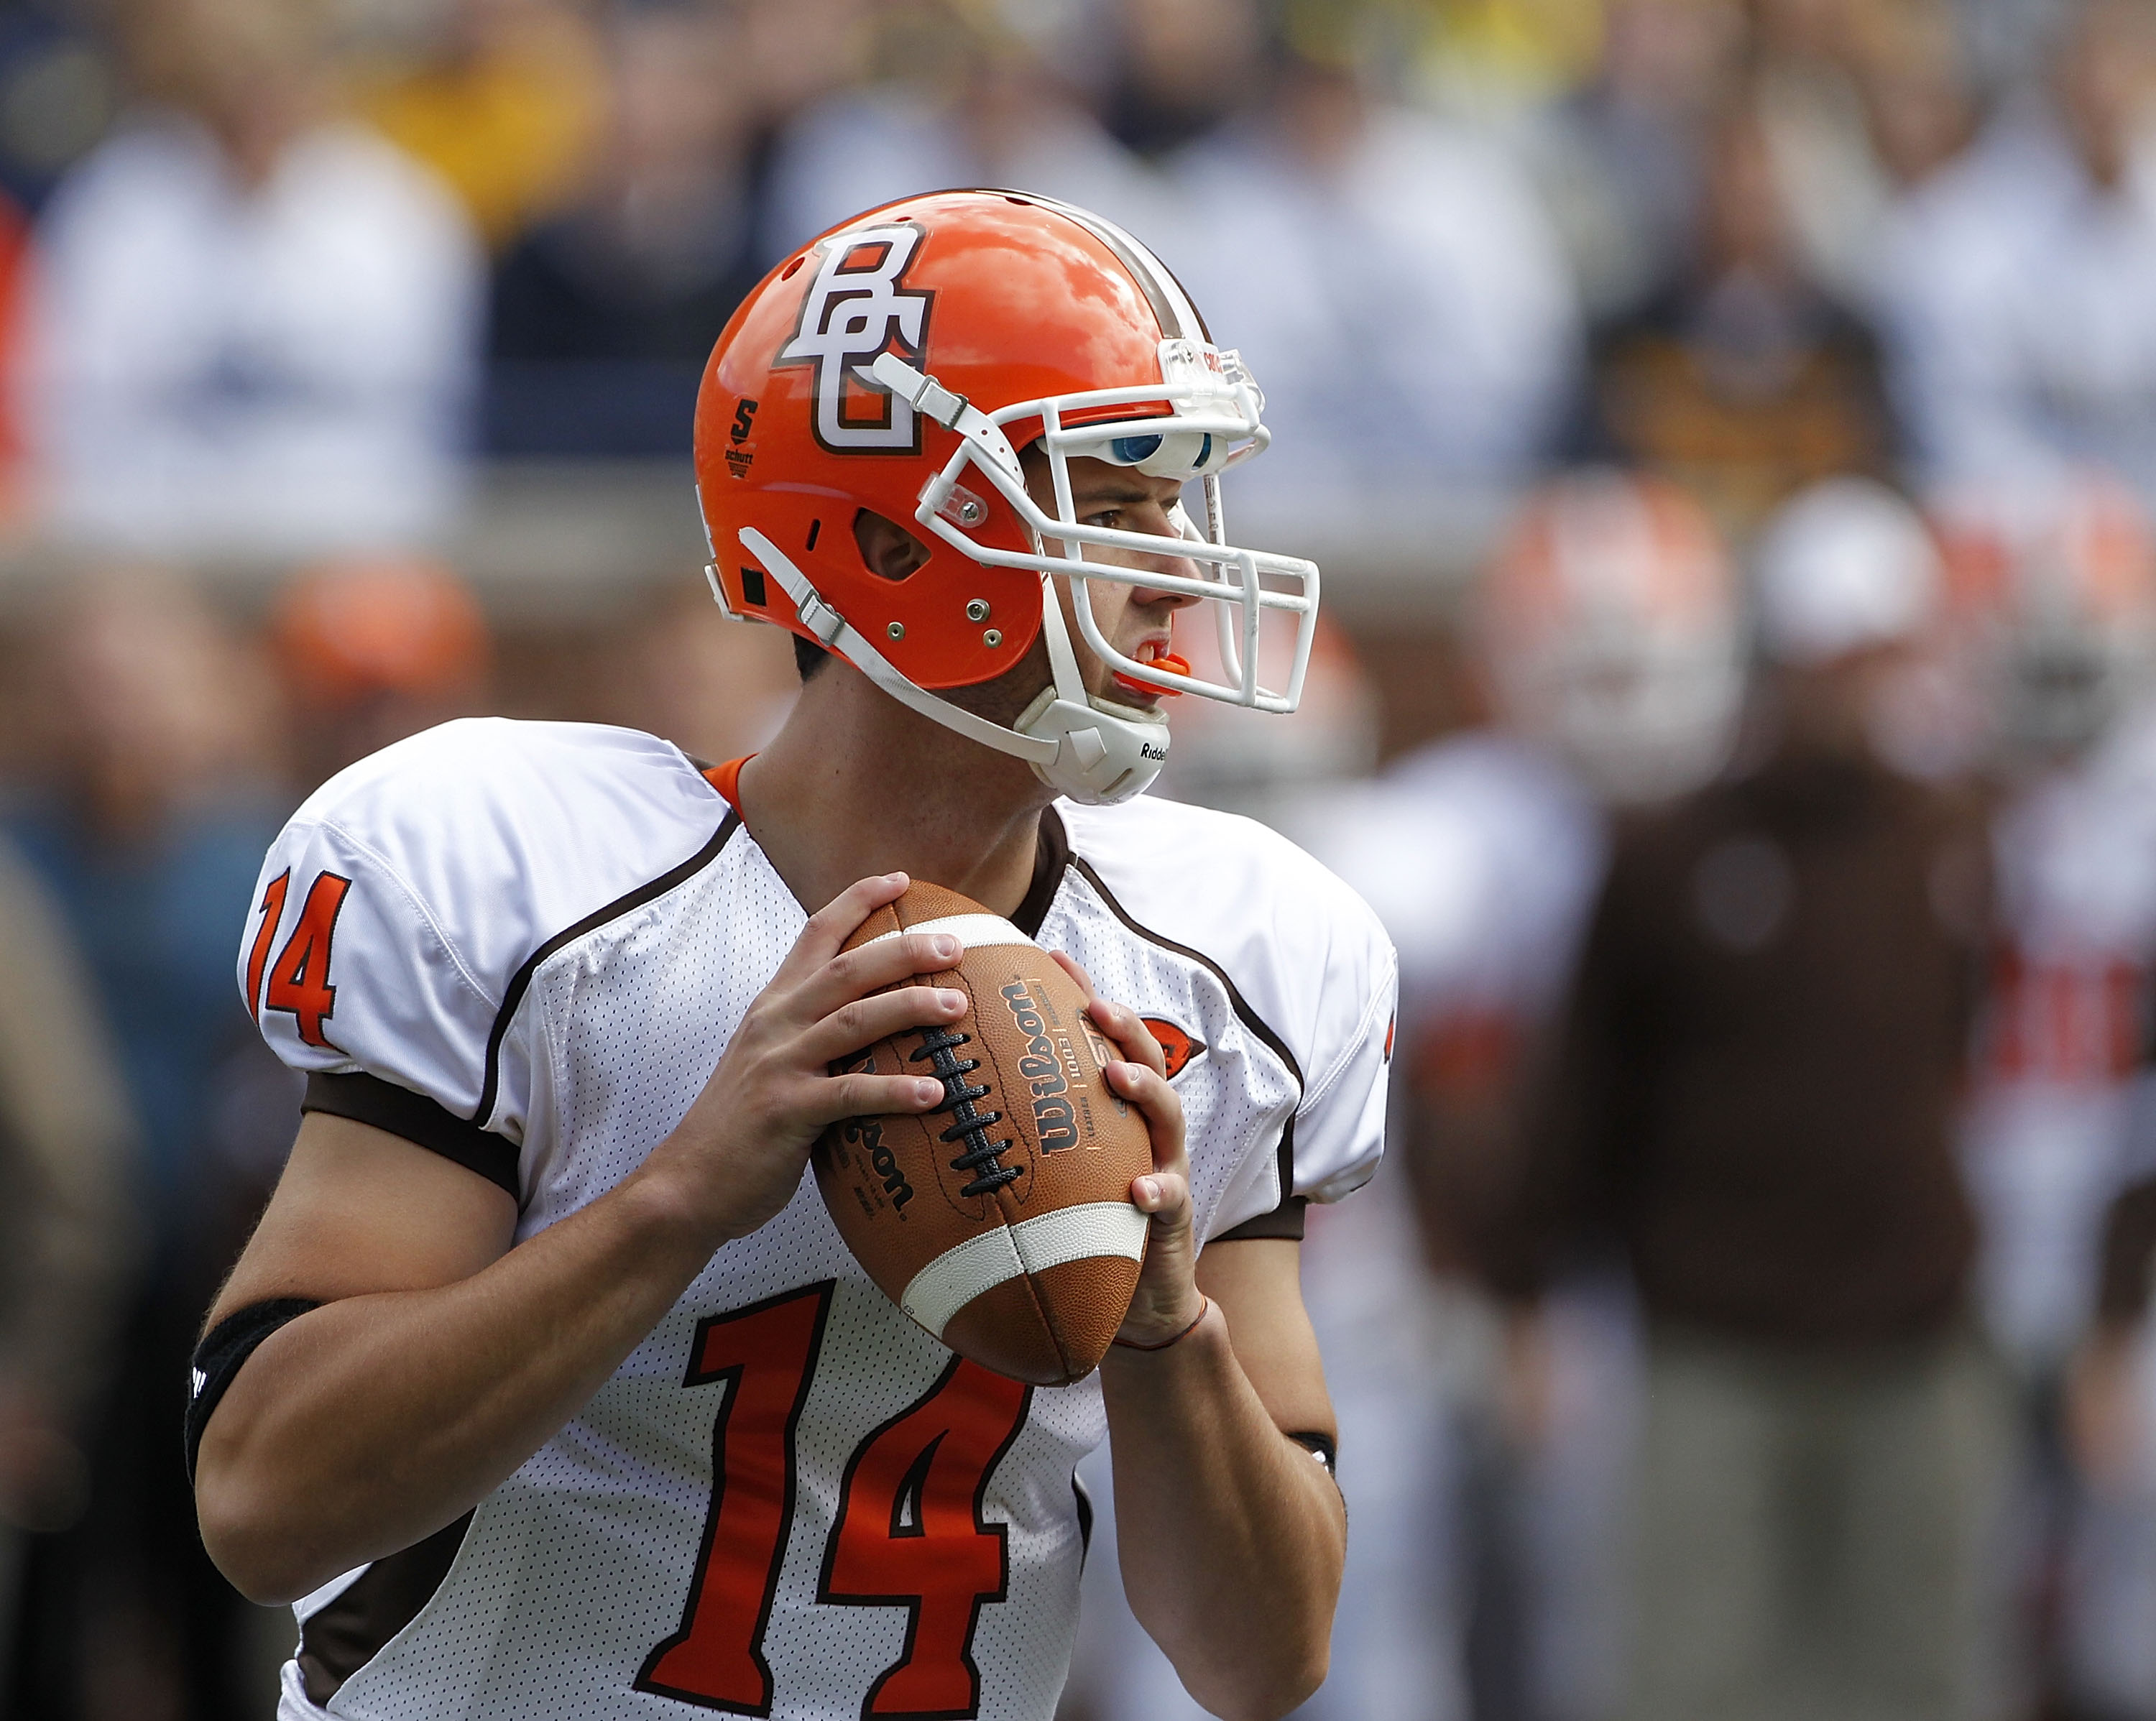 ANN ARBOR, MI - SEPTEMBER 25:  Aaron Pankratz #14 of Bowling Green drops back to pass in the first quarter during the game against the Michigan Wolverines on September 25, 2010 at Michigan Stadium in Ann Arbor, Michigan. Michigan defeated Bowling Green 65